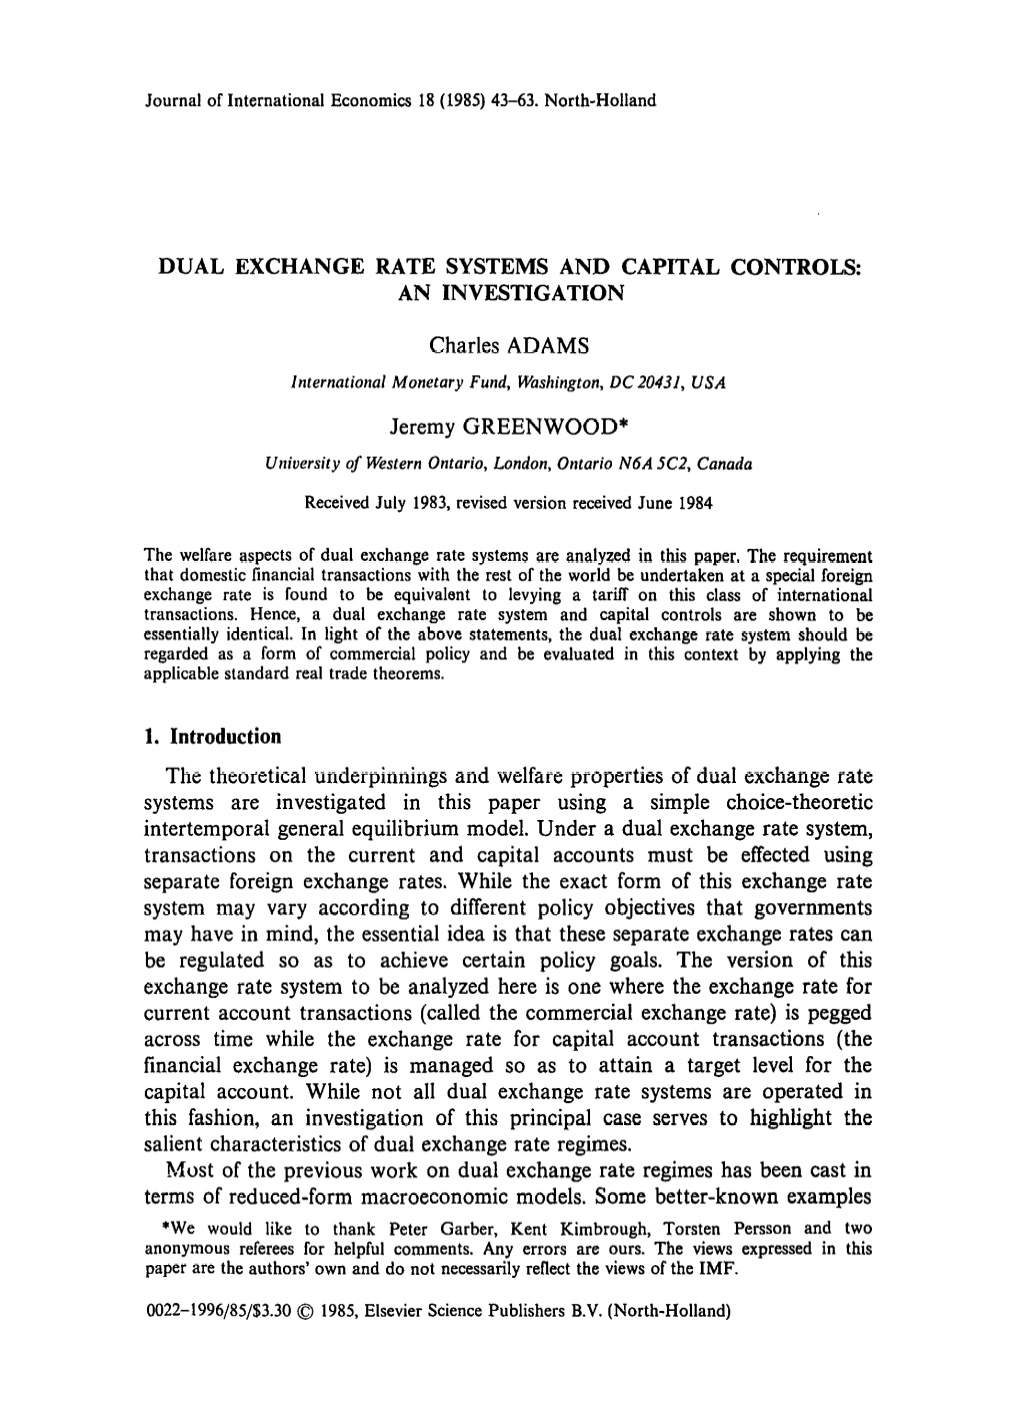 Dual Exchange Rate Systems and Capital Controls: an Investigation